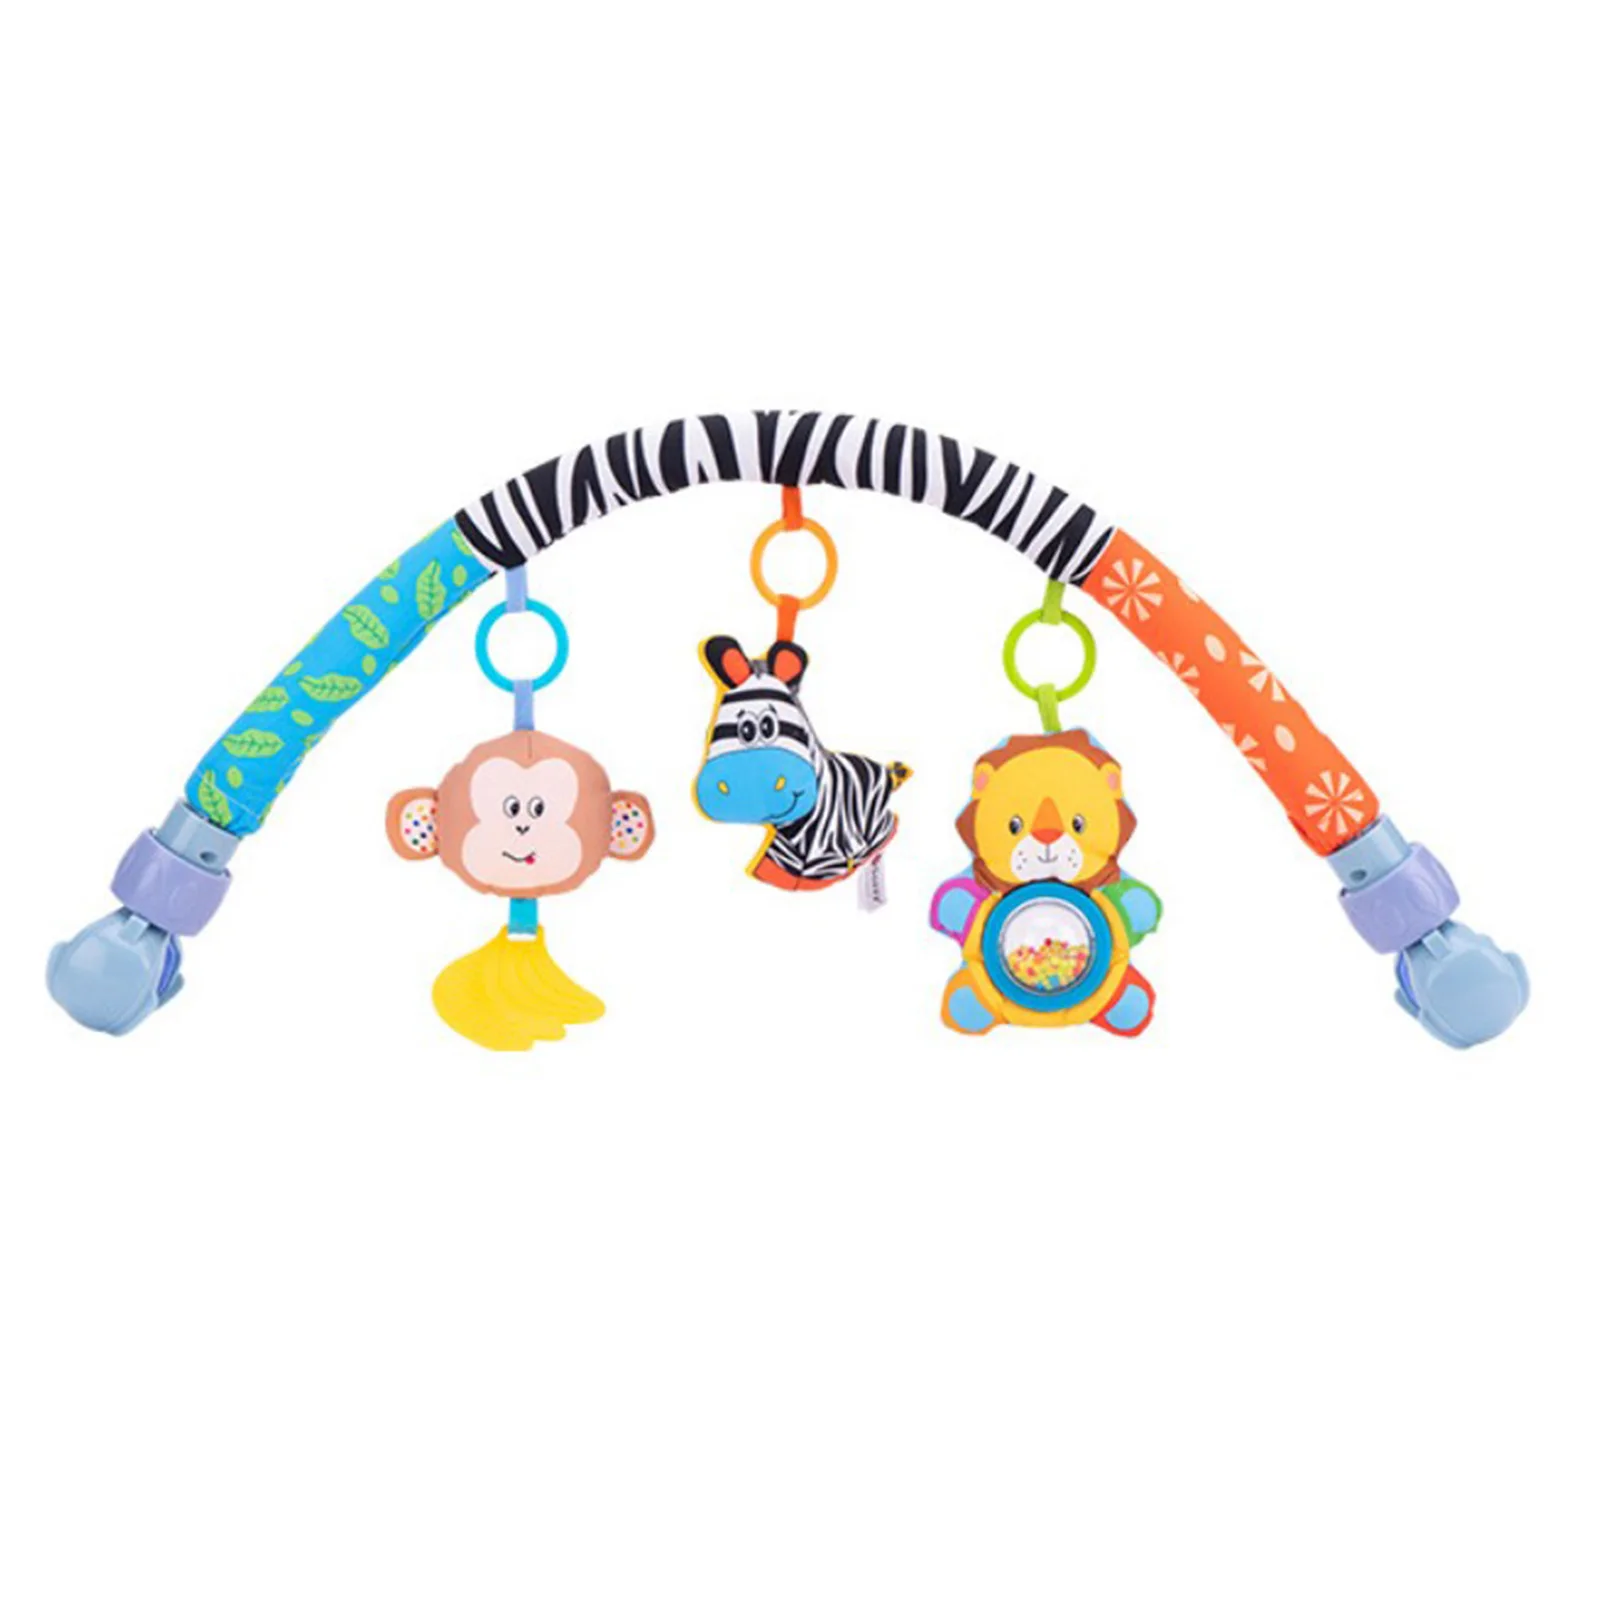 

Baby Stroller Arch Toy Baby Toy Clip Make Sounds Ideal For Infants And Toddlers Stimulates Baby’S Senses And Motor Skills